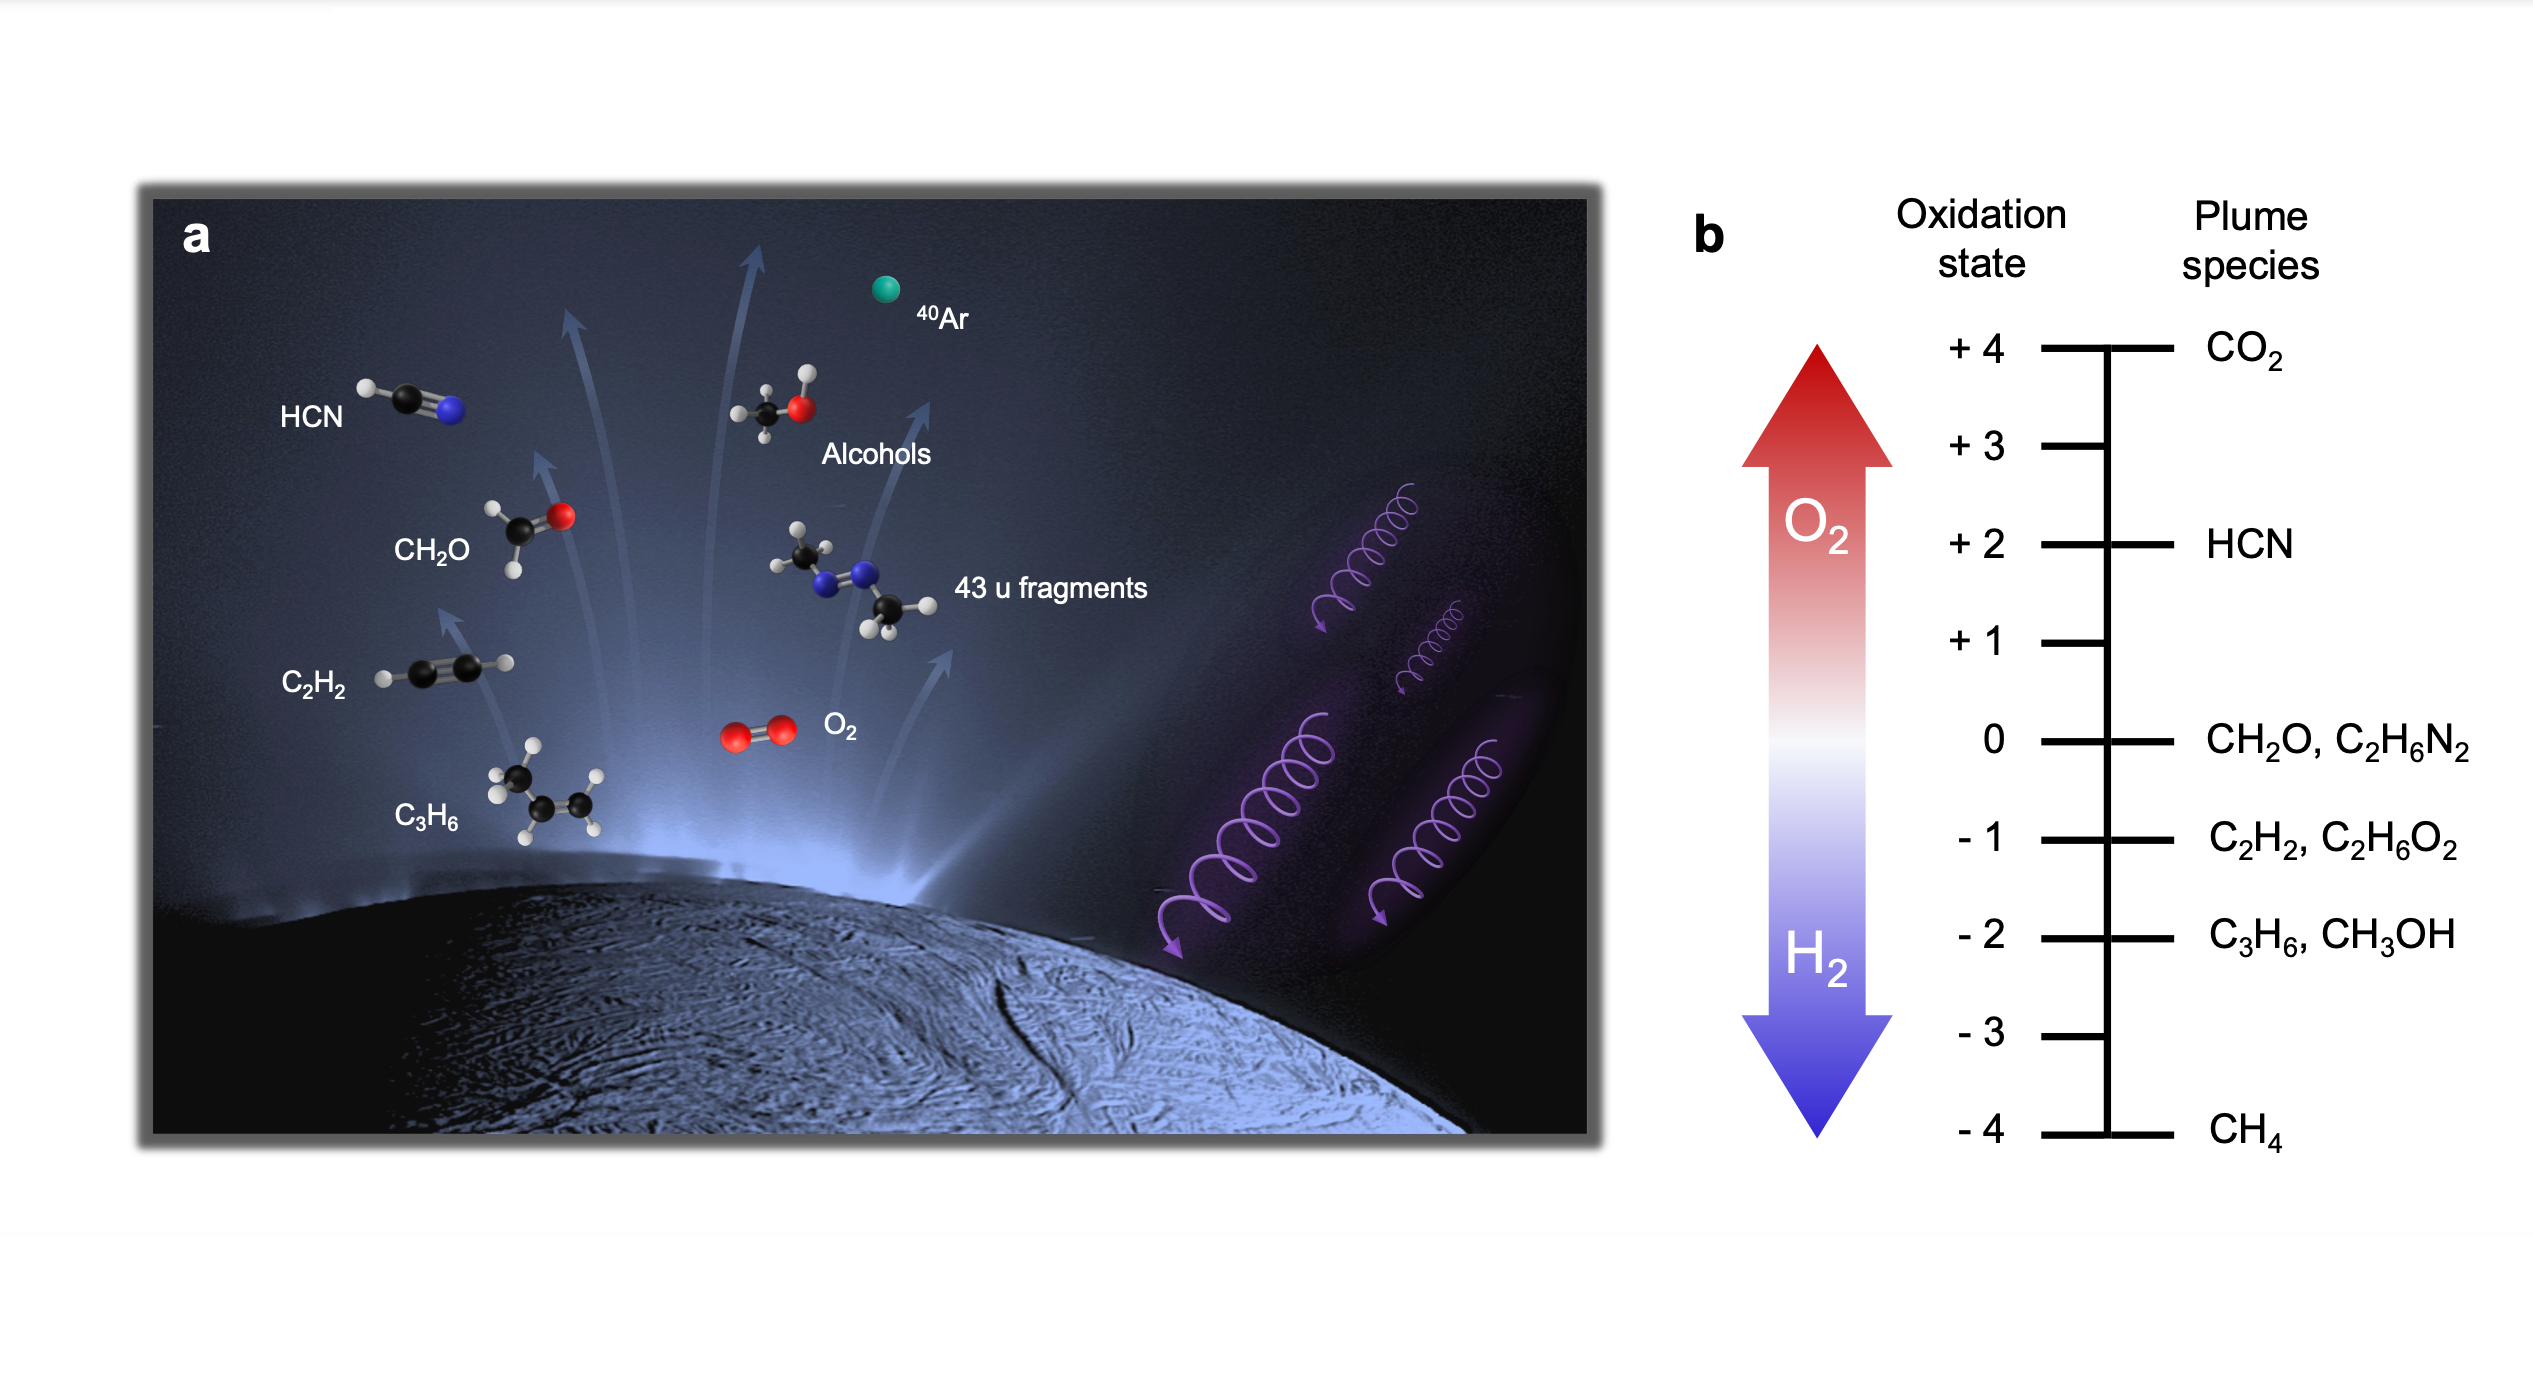 Detection Of HCN And Diverse Redox Chemistry In The Plume Of Enceladus